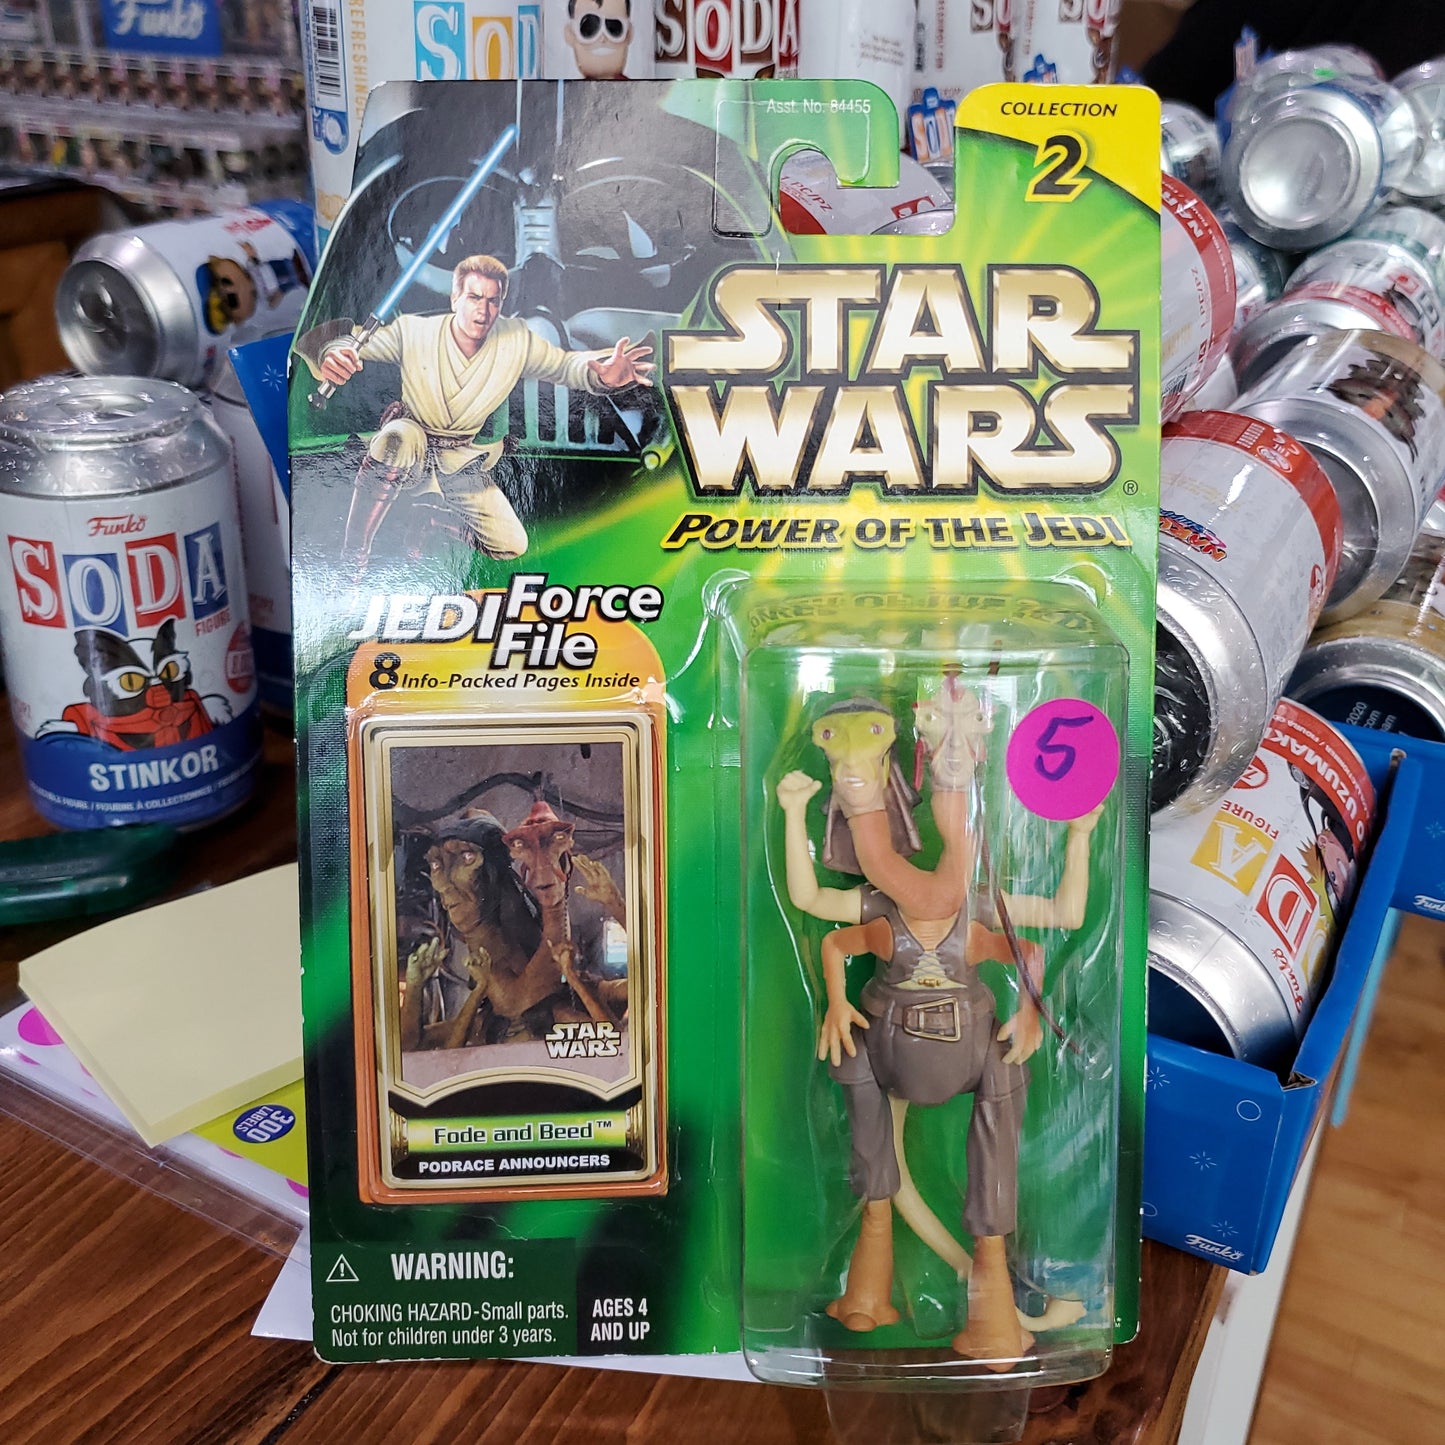 Star Wars: Power of the Jedi - Fode and Beed - Hasbro Action Figure